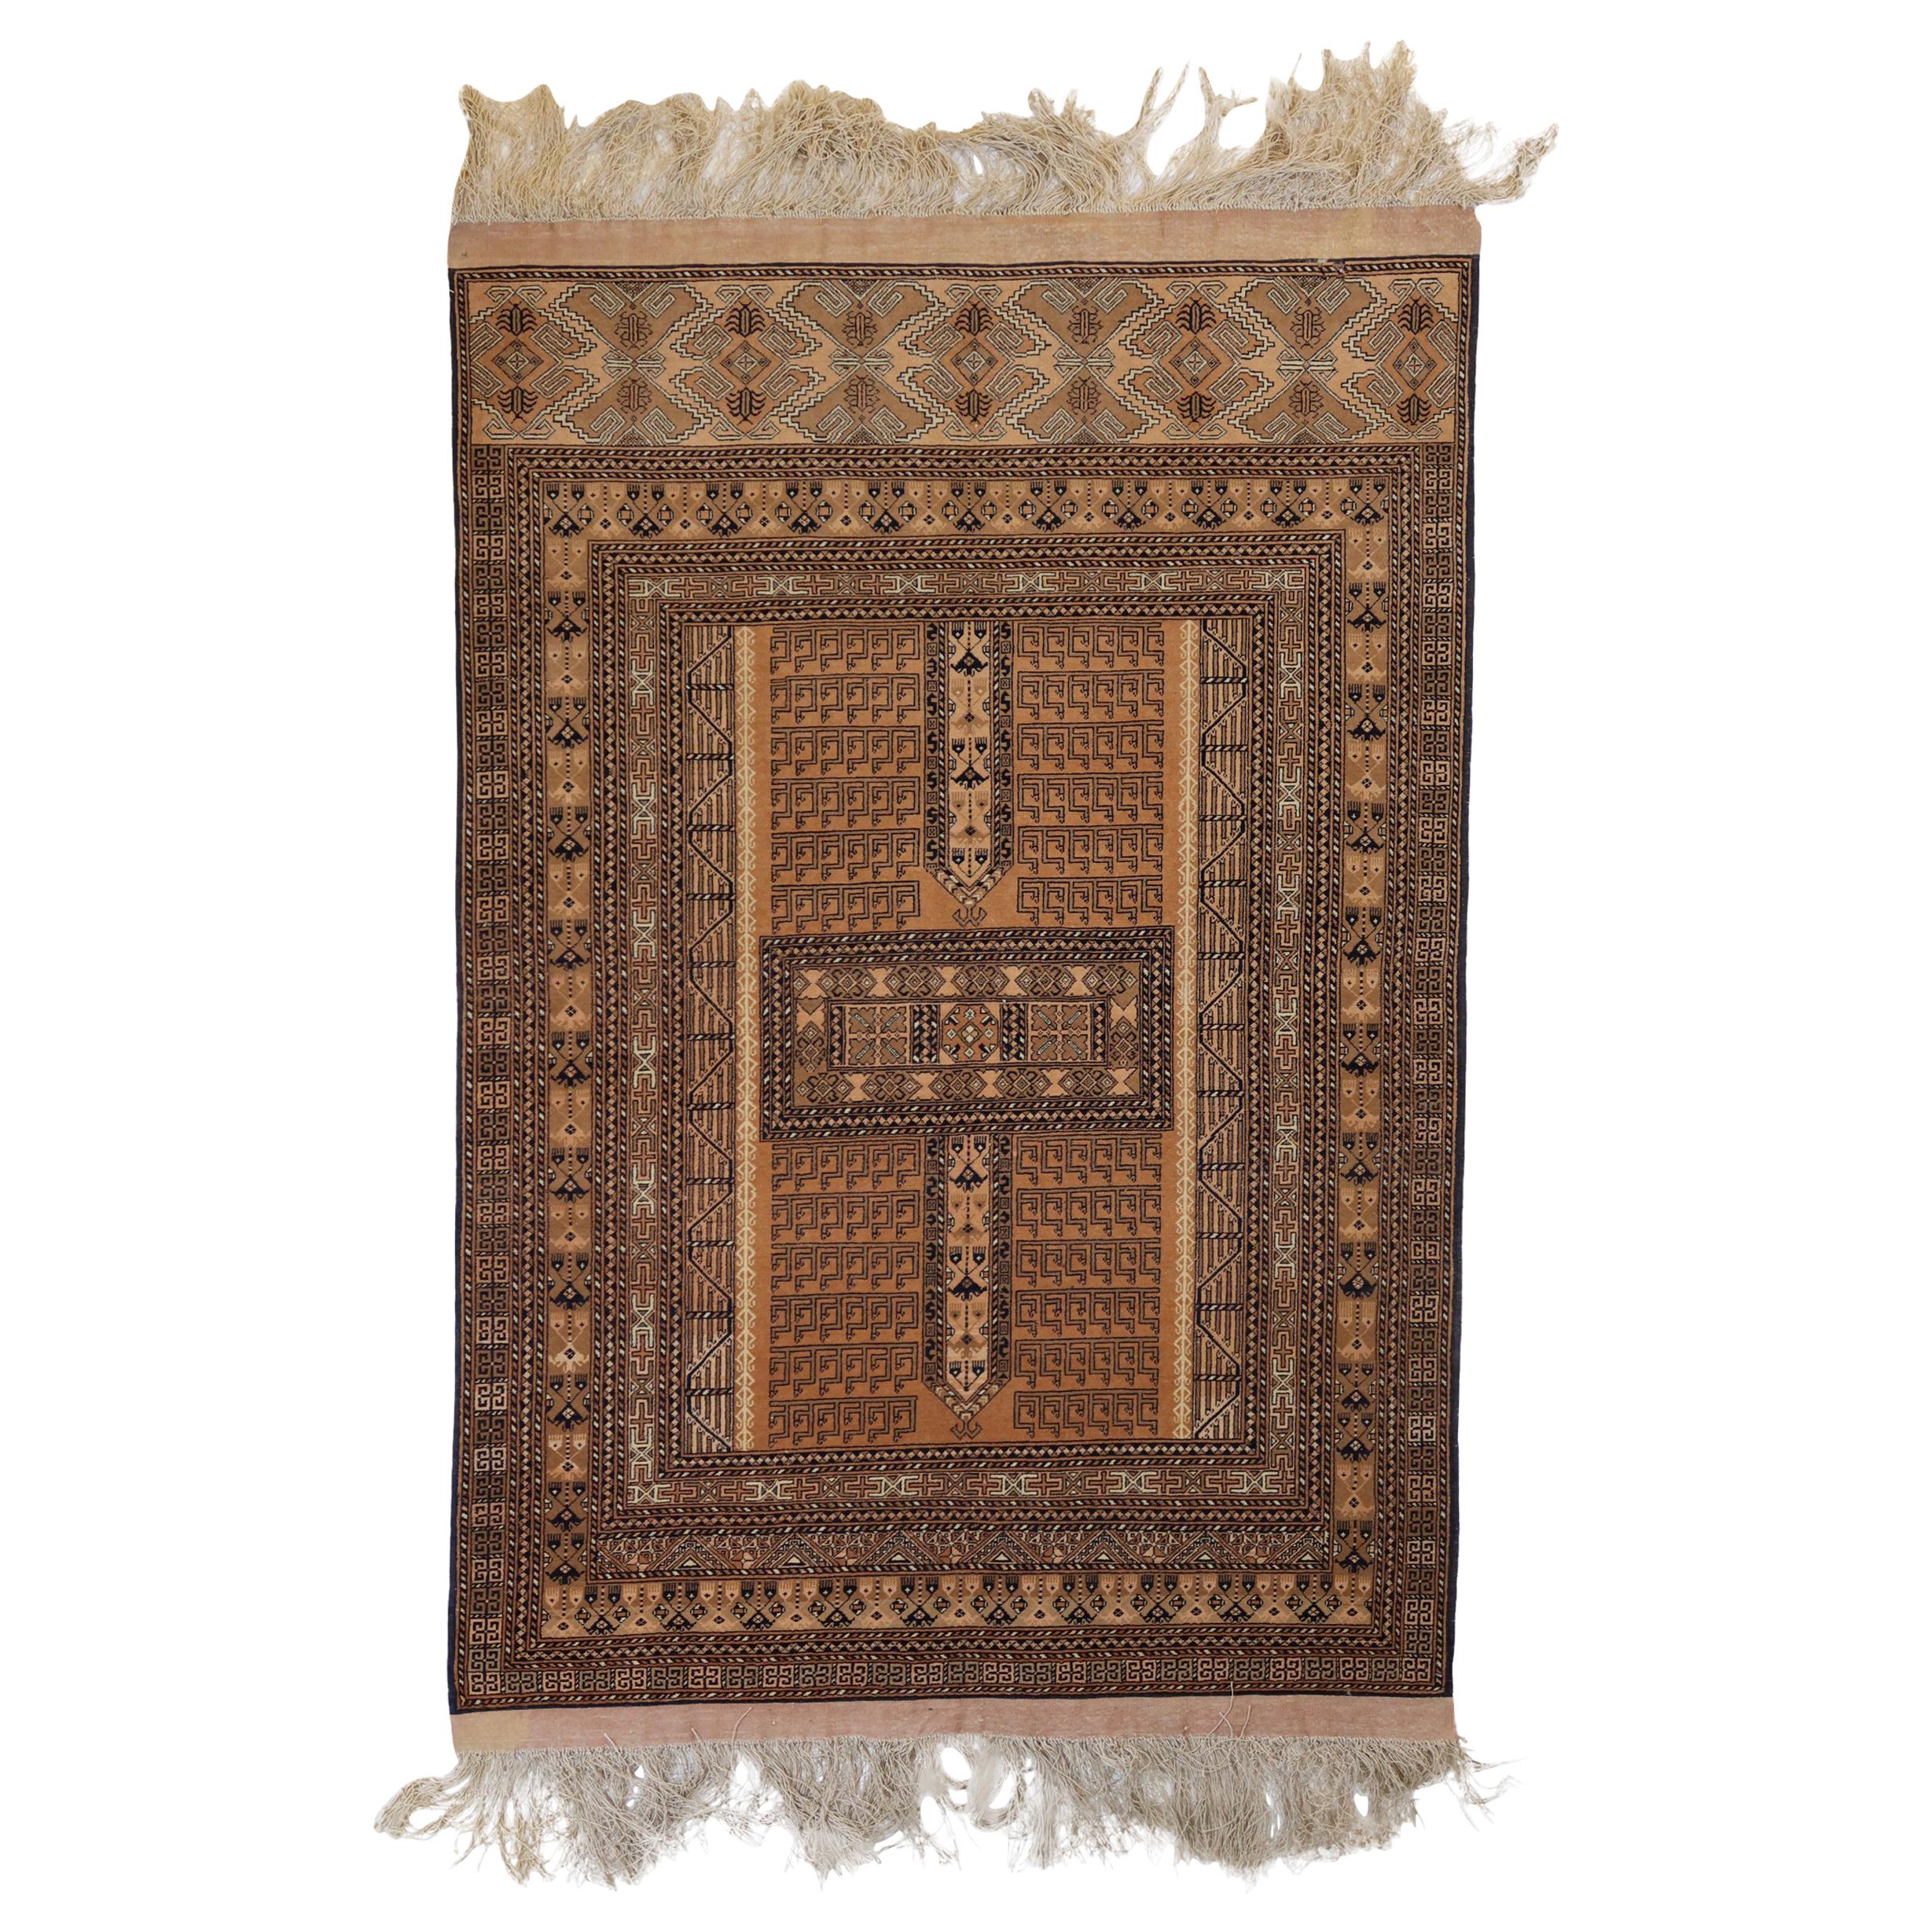 Wool Central Asian Rugs